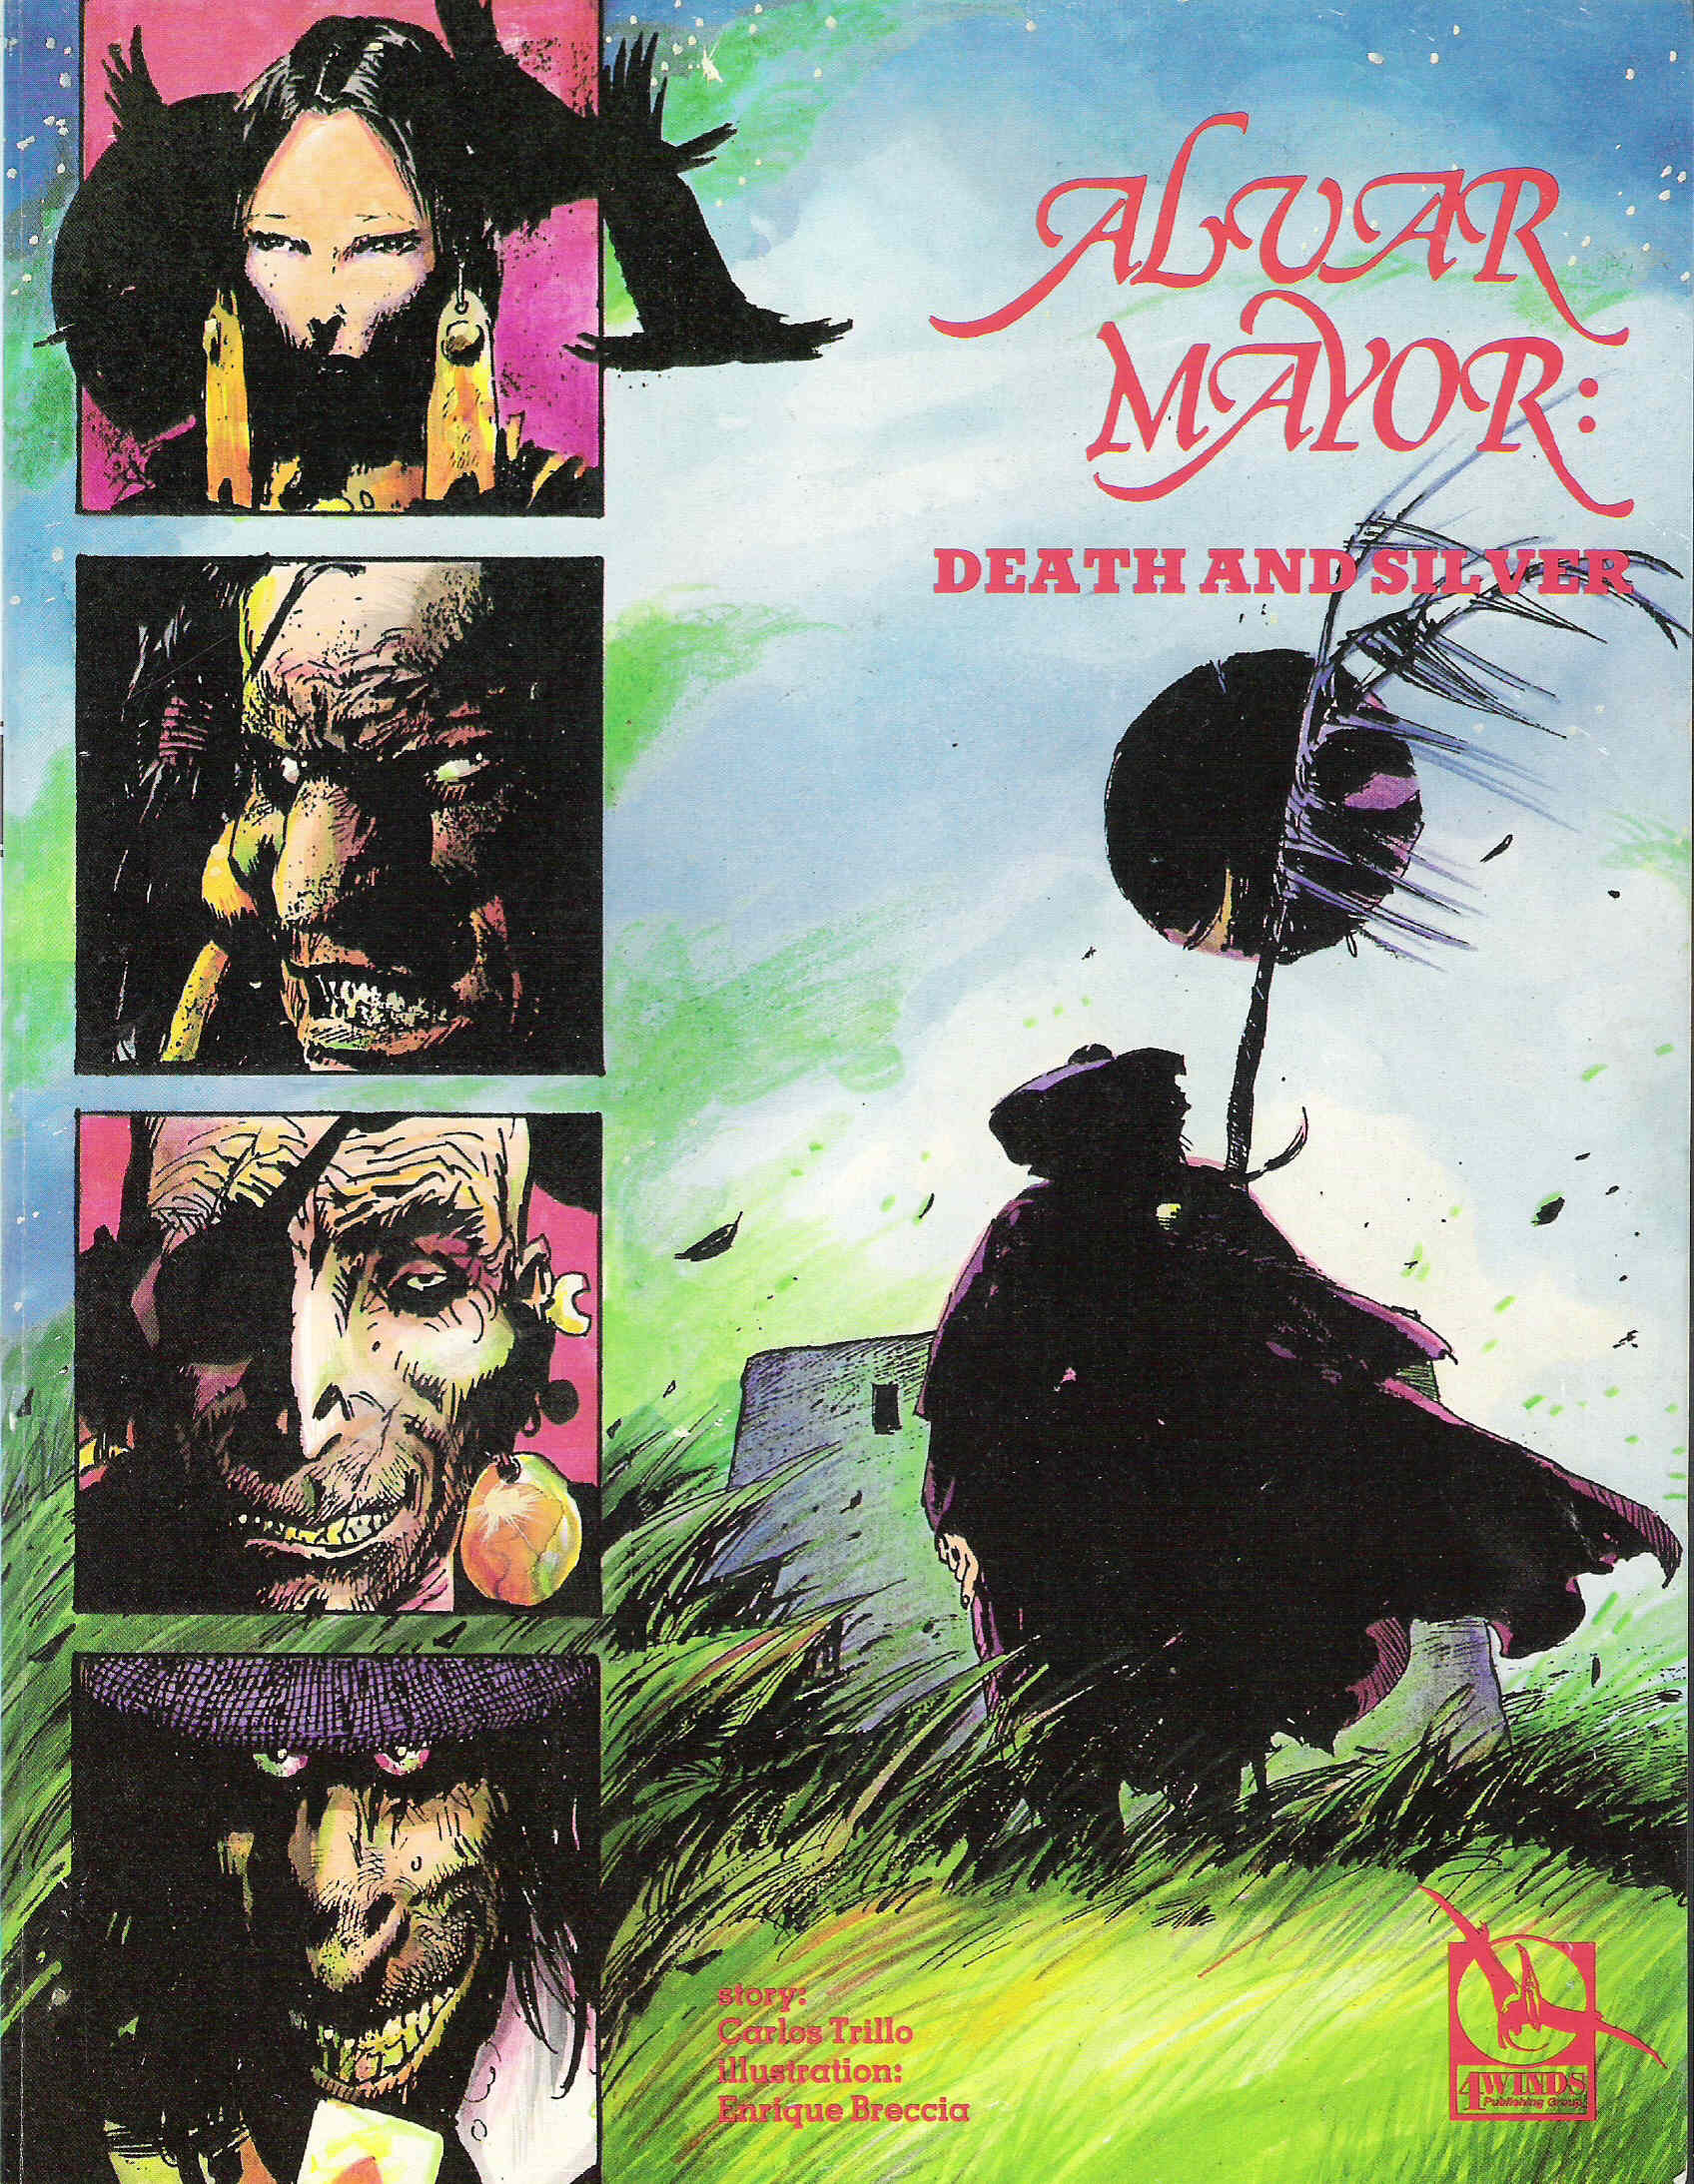 Read online Alvar Mayor: Death and Silver comic -  Issue # Full - 1